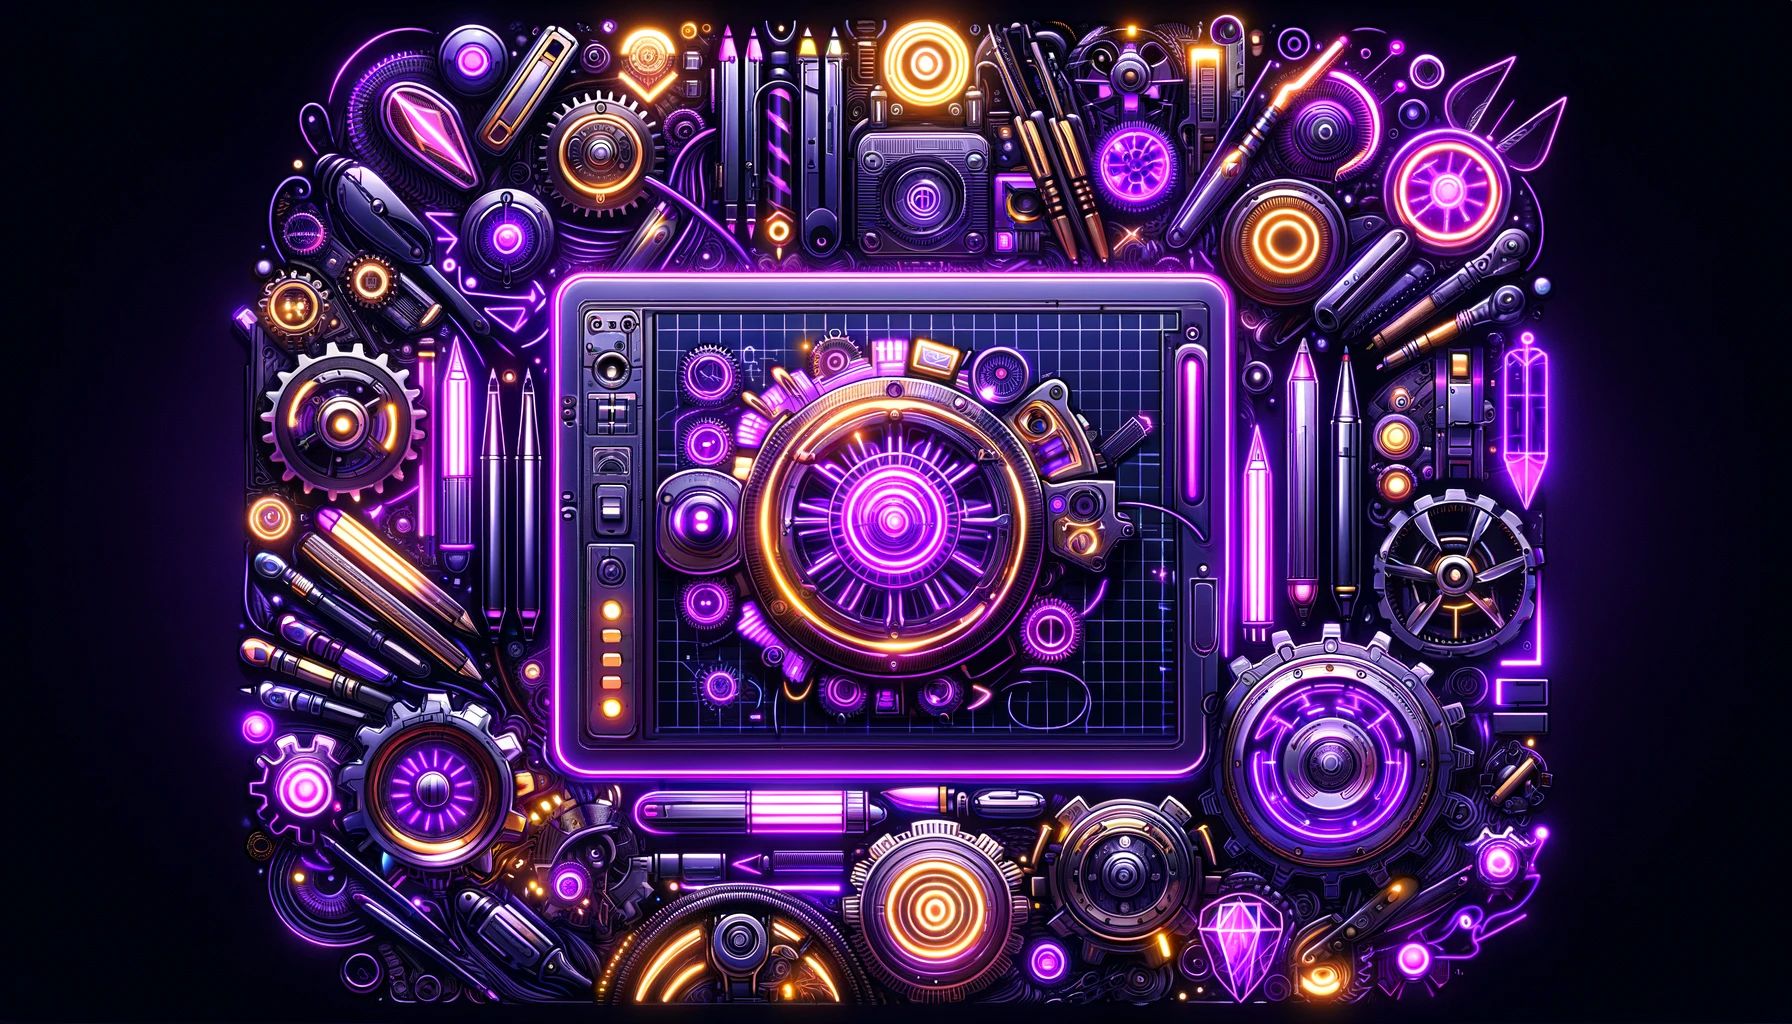 Dynamic purple neon steampunk-inspired hero image for Newark Graphic Design, featuring digital design tools and Victorian motifs.